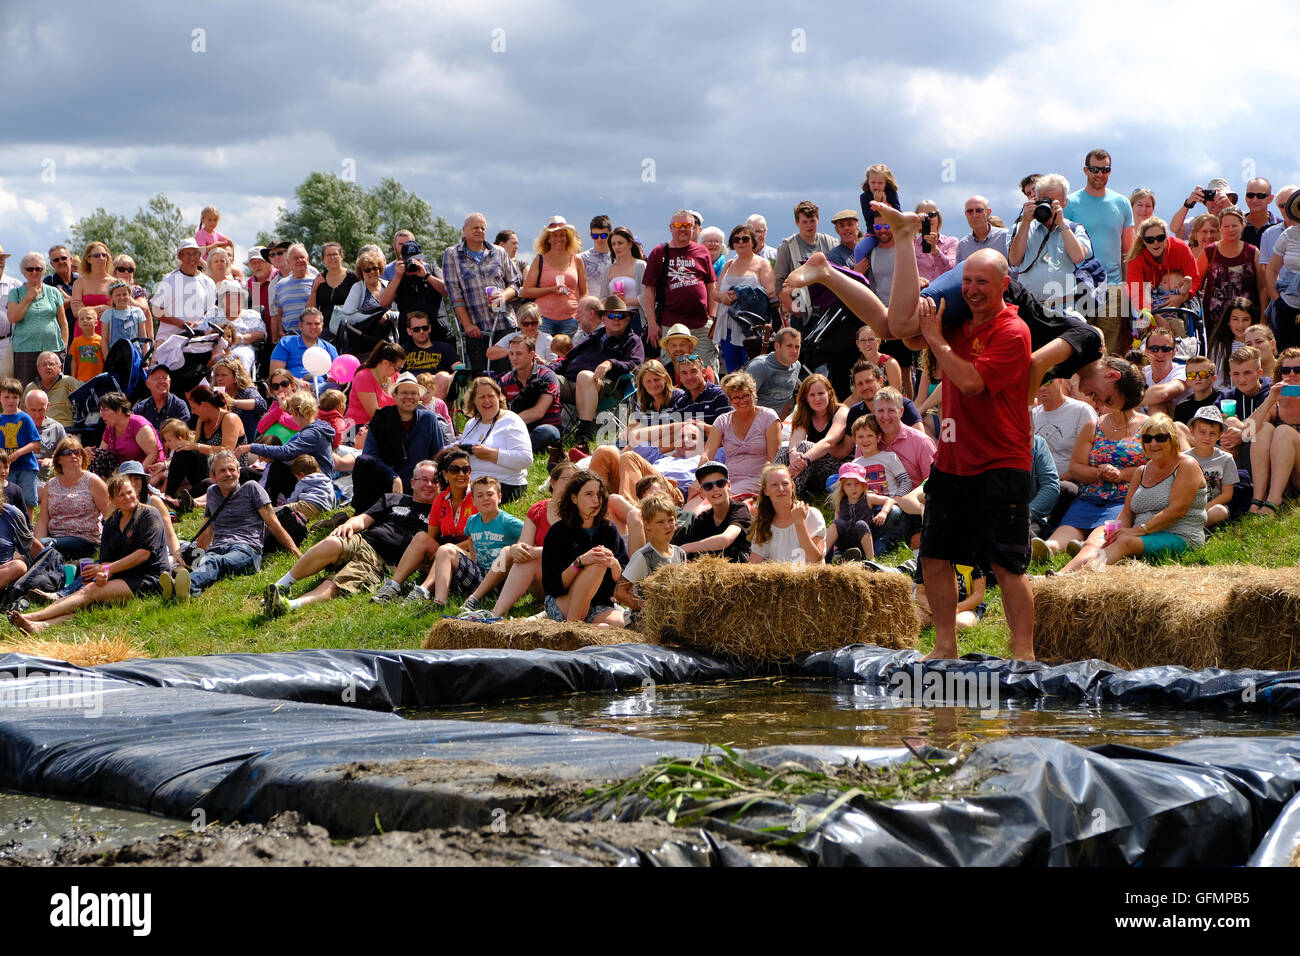 Lowland Games, Thorney, Somerset, UK, 31 July 2016: Competitors take part in the annual Lowland Games Wife Carrying race in Somerset. Hundreds turned out in the heat to watch the Lowland Games which includes such events as a Raft Race, Hay Bale Racing , River its a Knock Out, Mud Wrestling, and Chunder Challenge. The games, originally started in 1984, are held annually in the Lowland village of Thorney which became flooded for the first time in centuries during the Somerset floods in January 2014. Credit:  Tom Corban/Alamy Live News Stock Photo